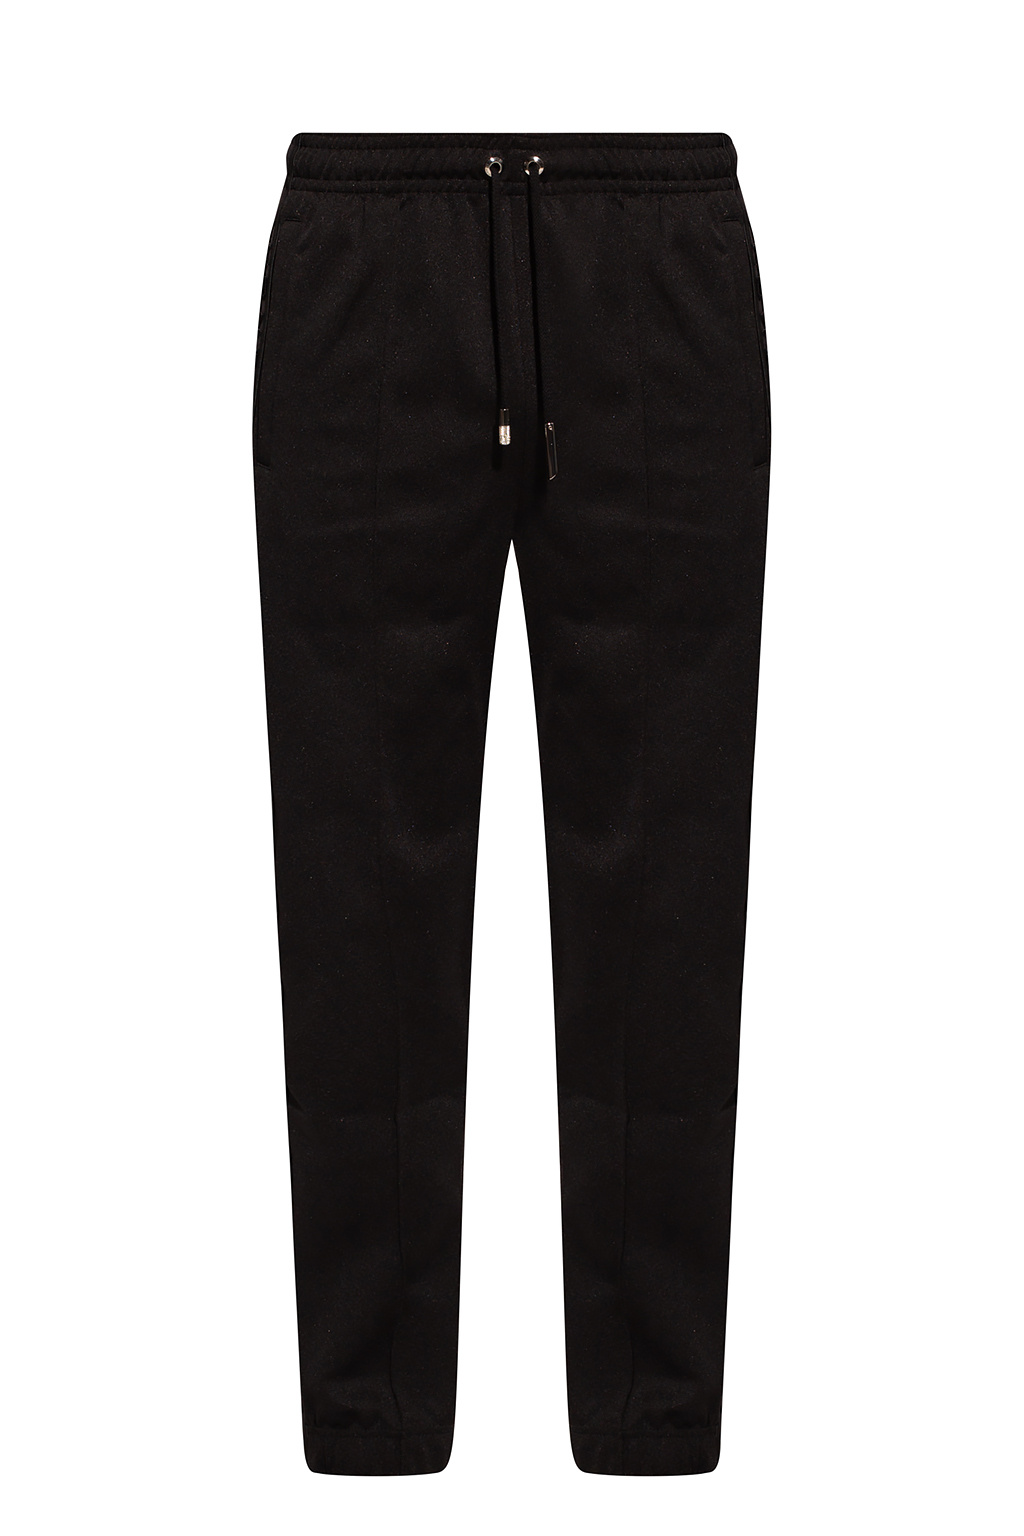 GIVENCHY - Sports Trousers